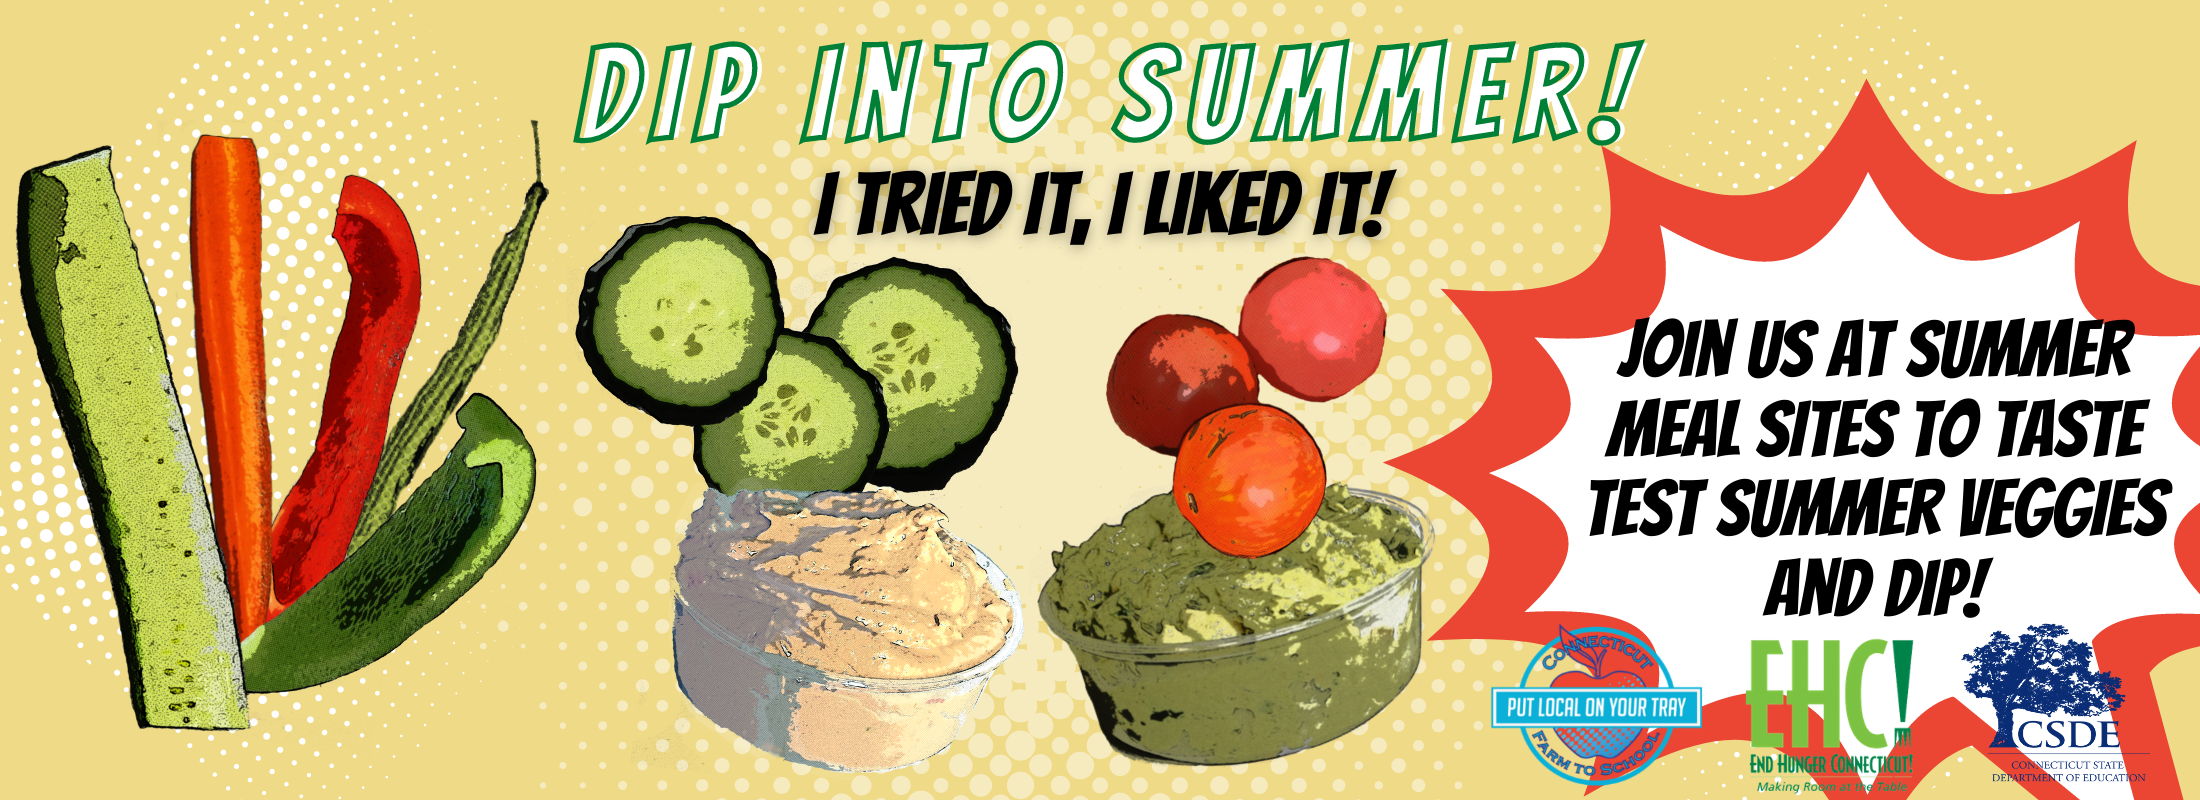 Dip into summer- I tried it I liked it! banner collage